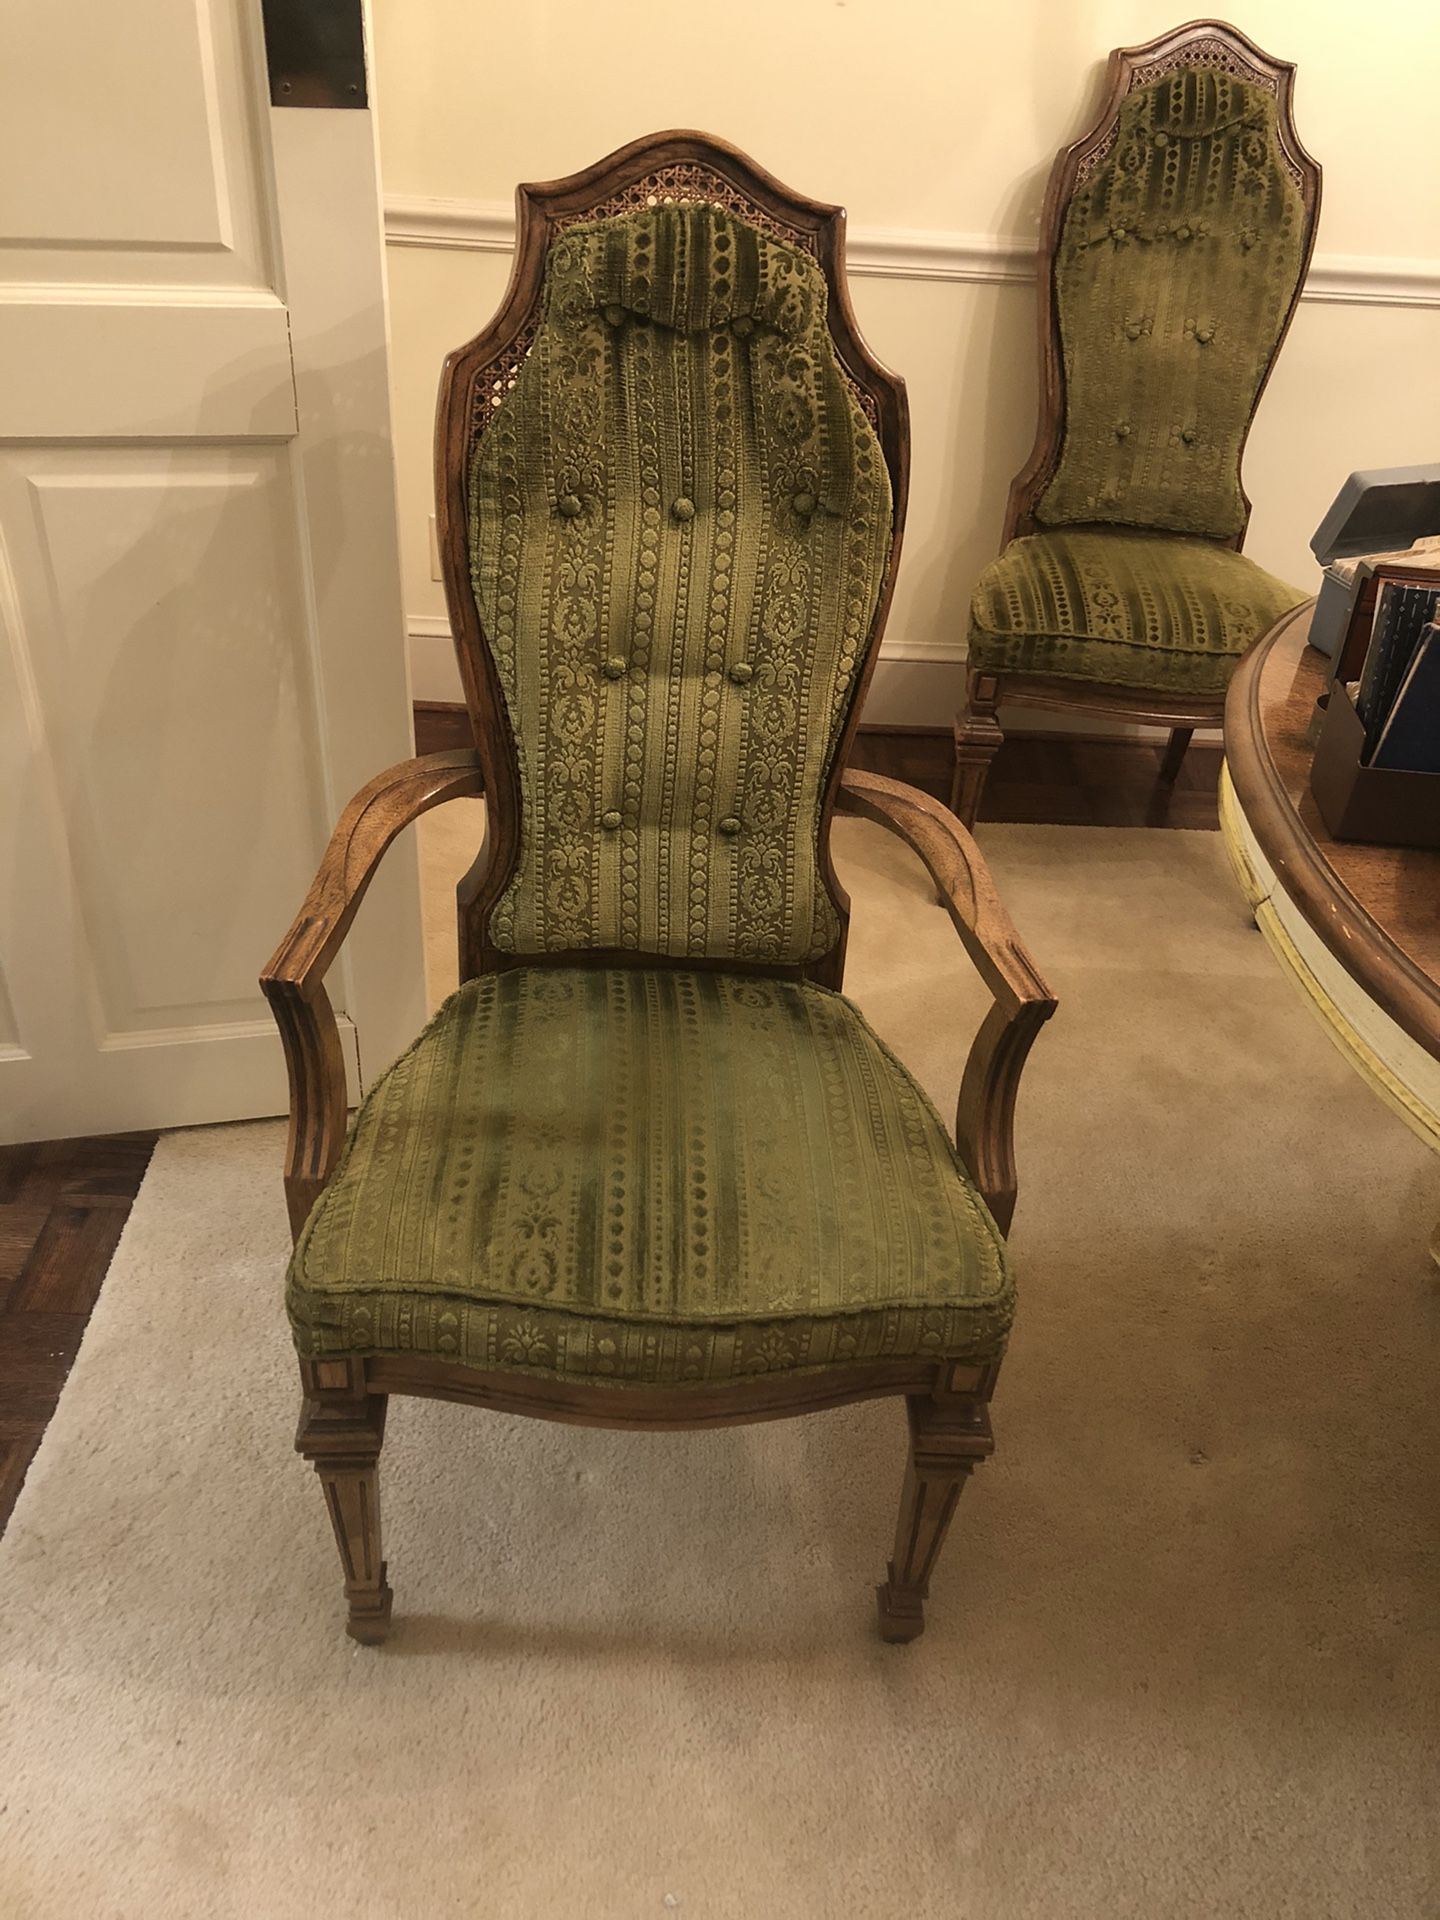 6 chairs $175